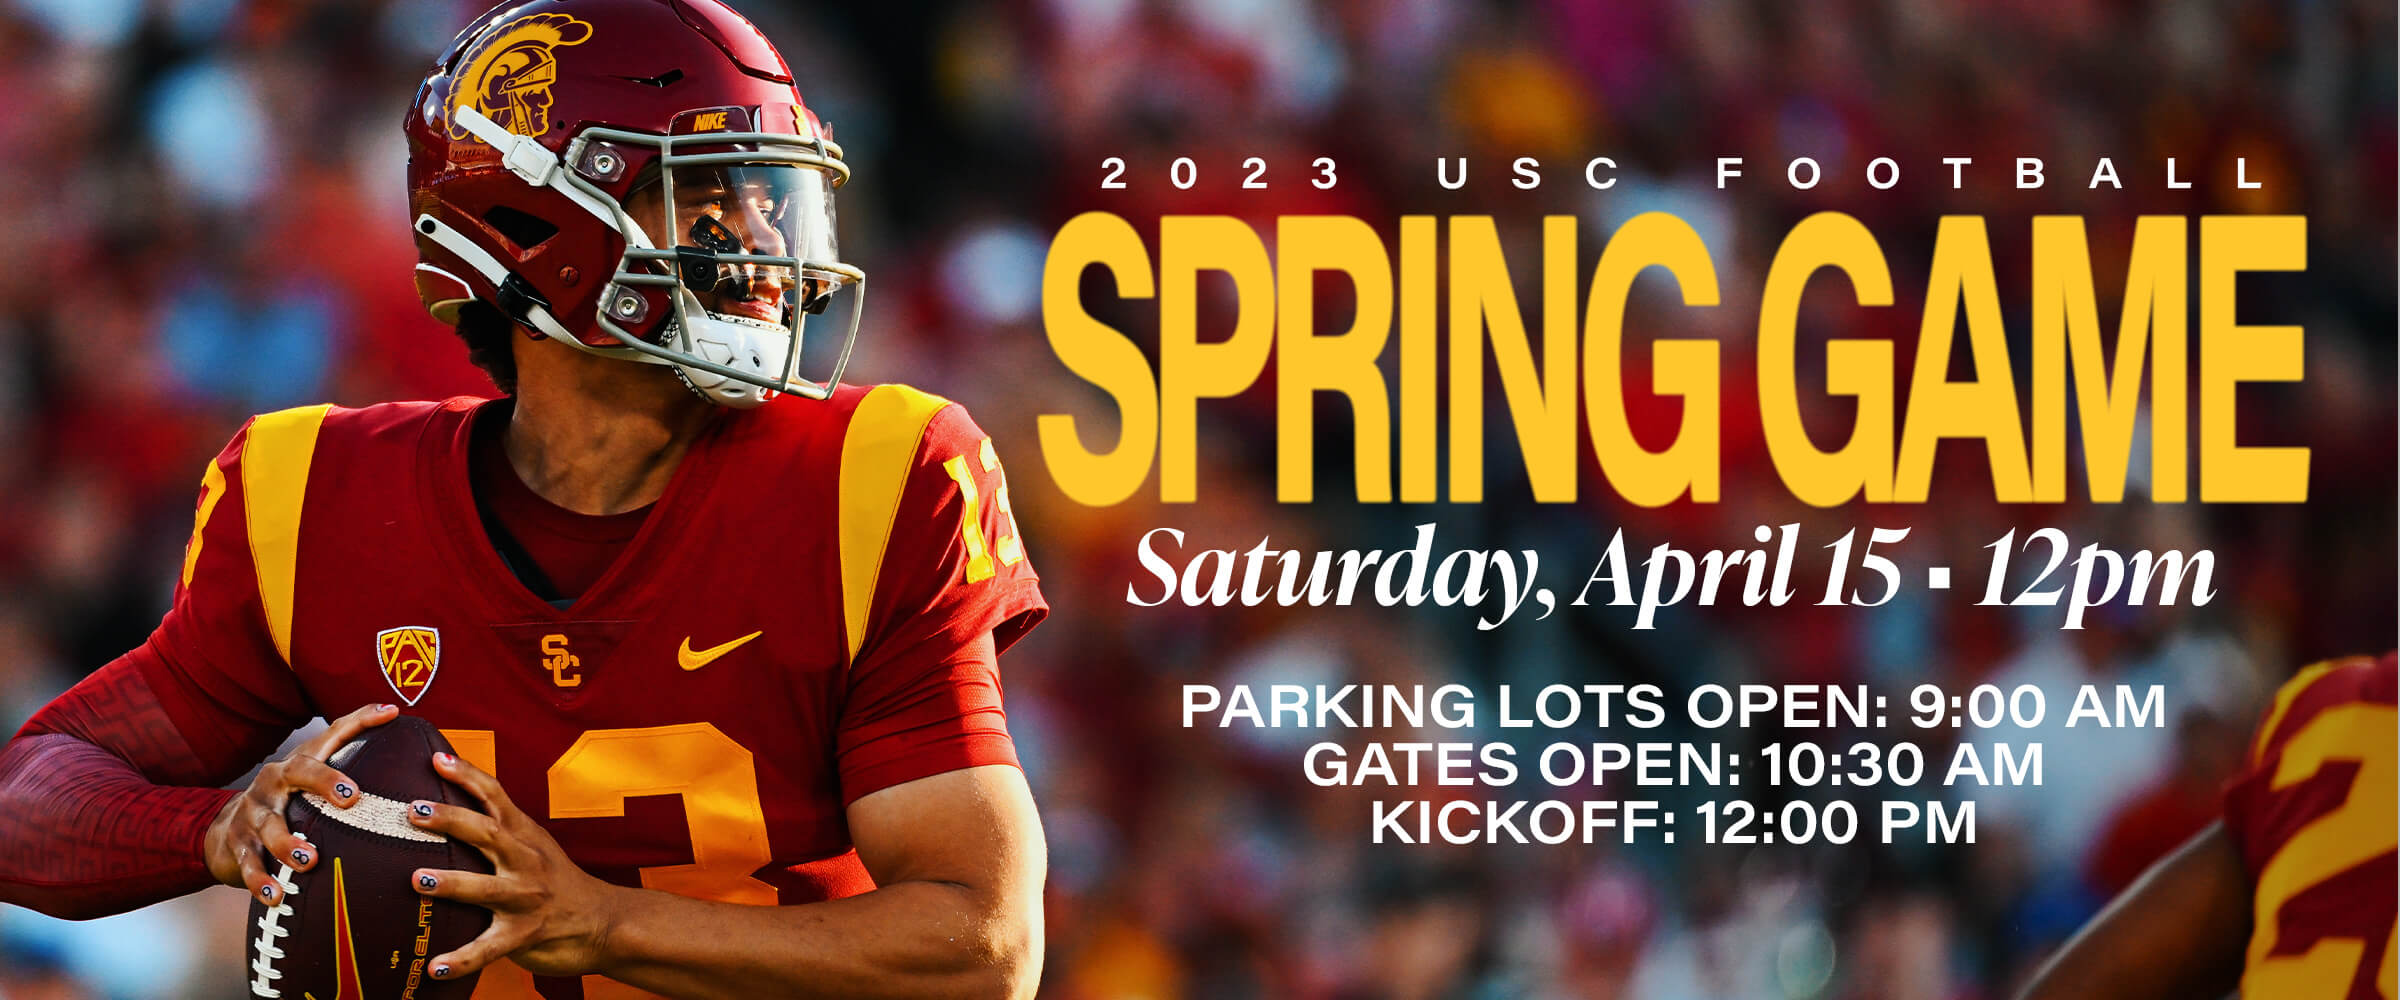 USC Football Spring Game